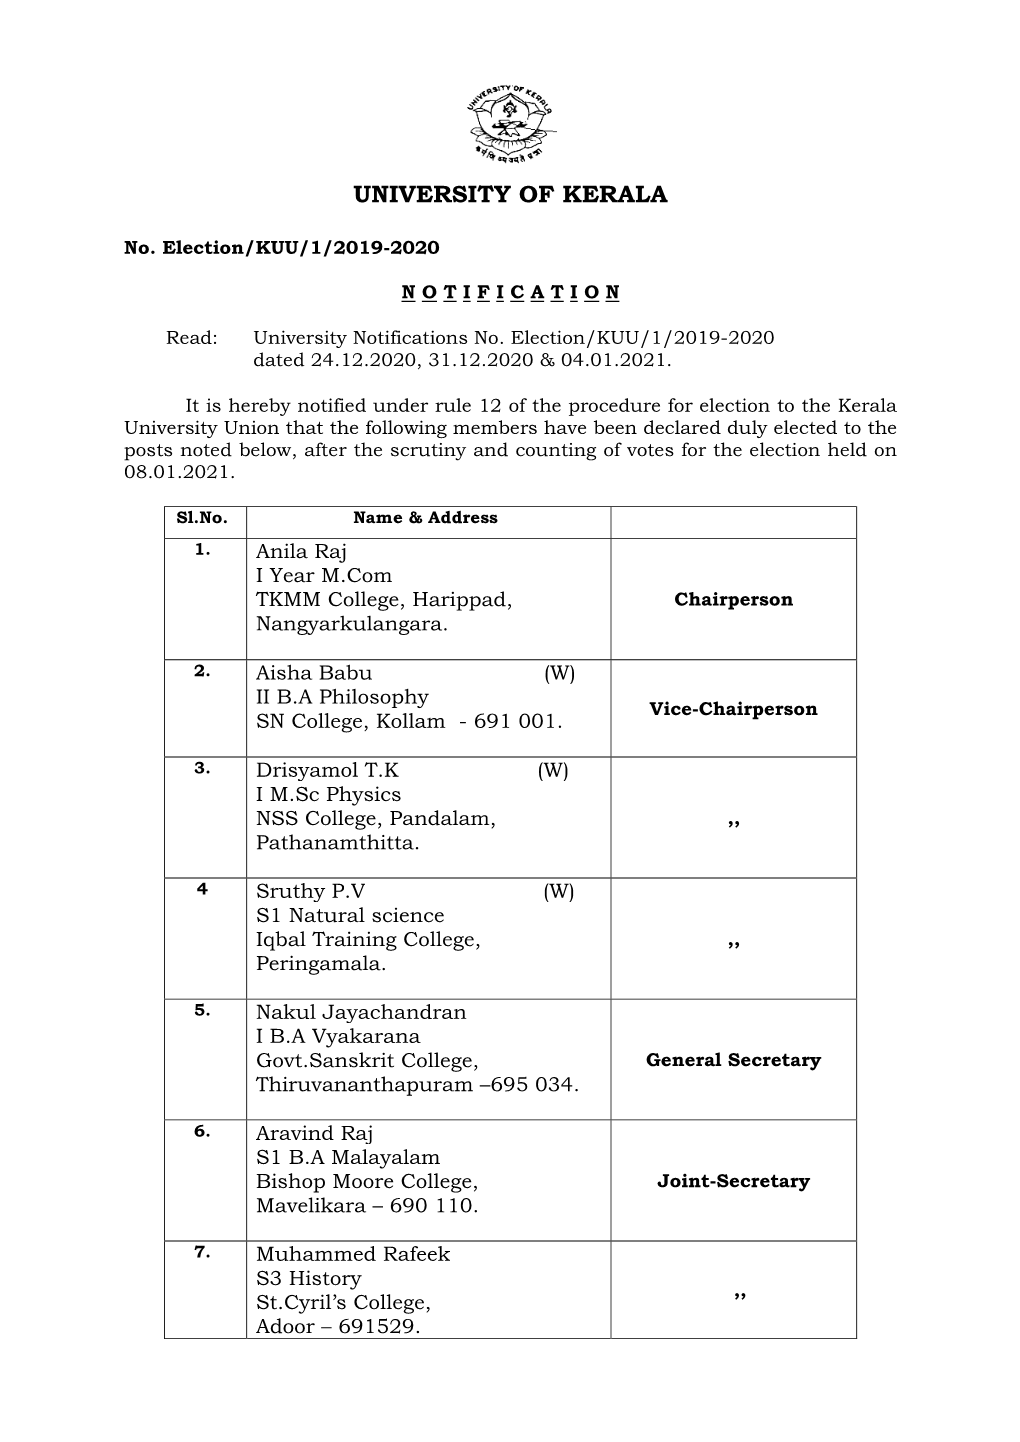 Election of Office Bearers of the Kerala University